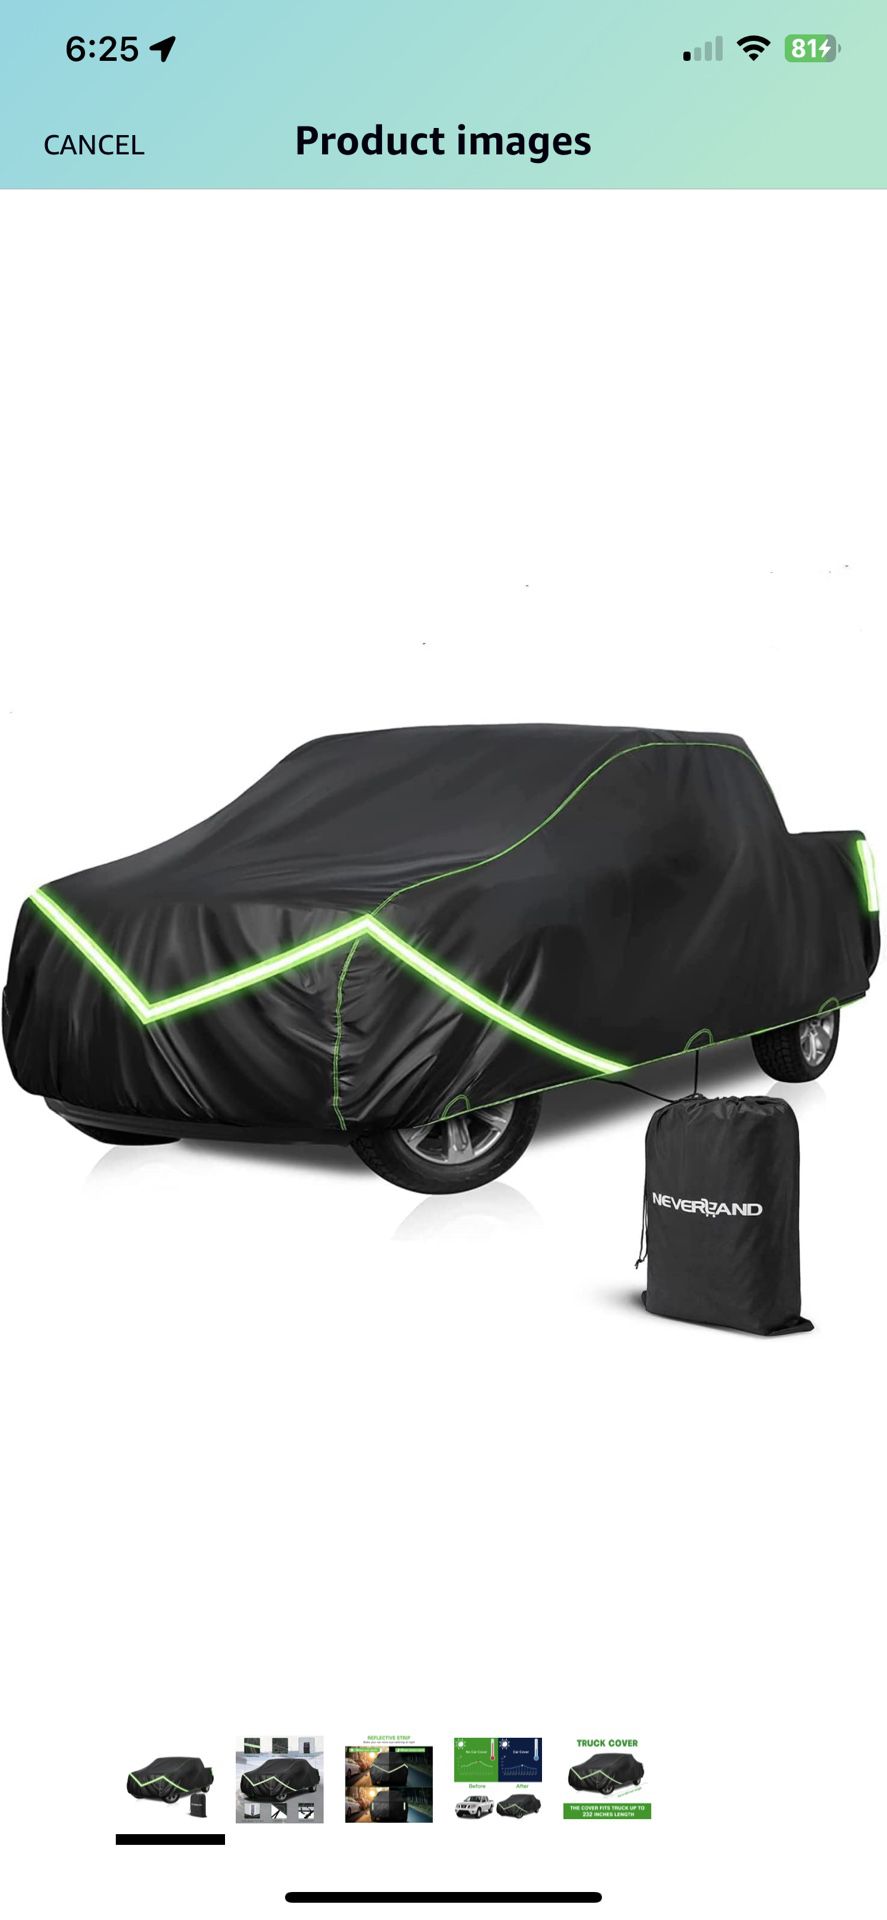 NEVERLAND Truck Cover 200% Waterproof,Pickup Truck Cover All Weather